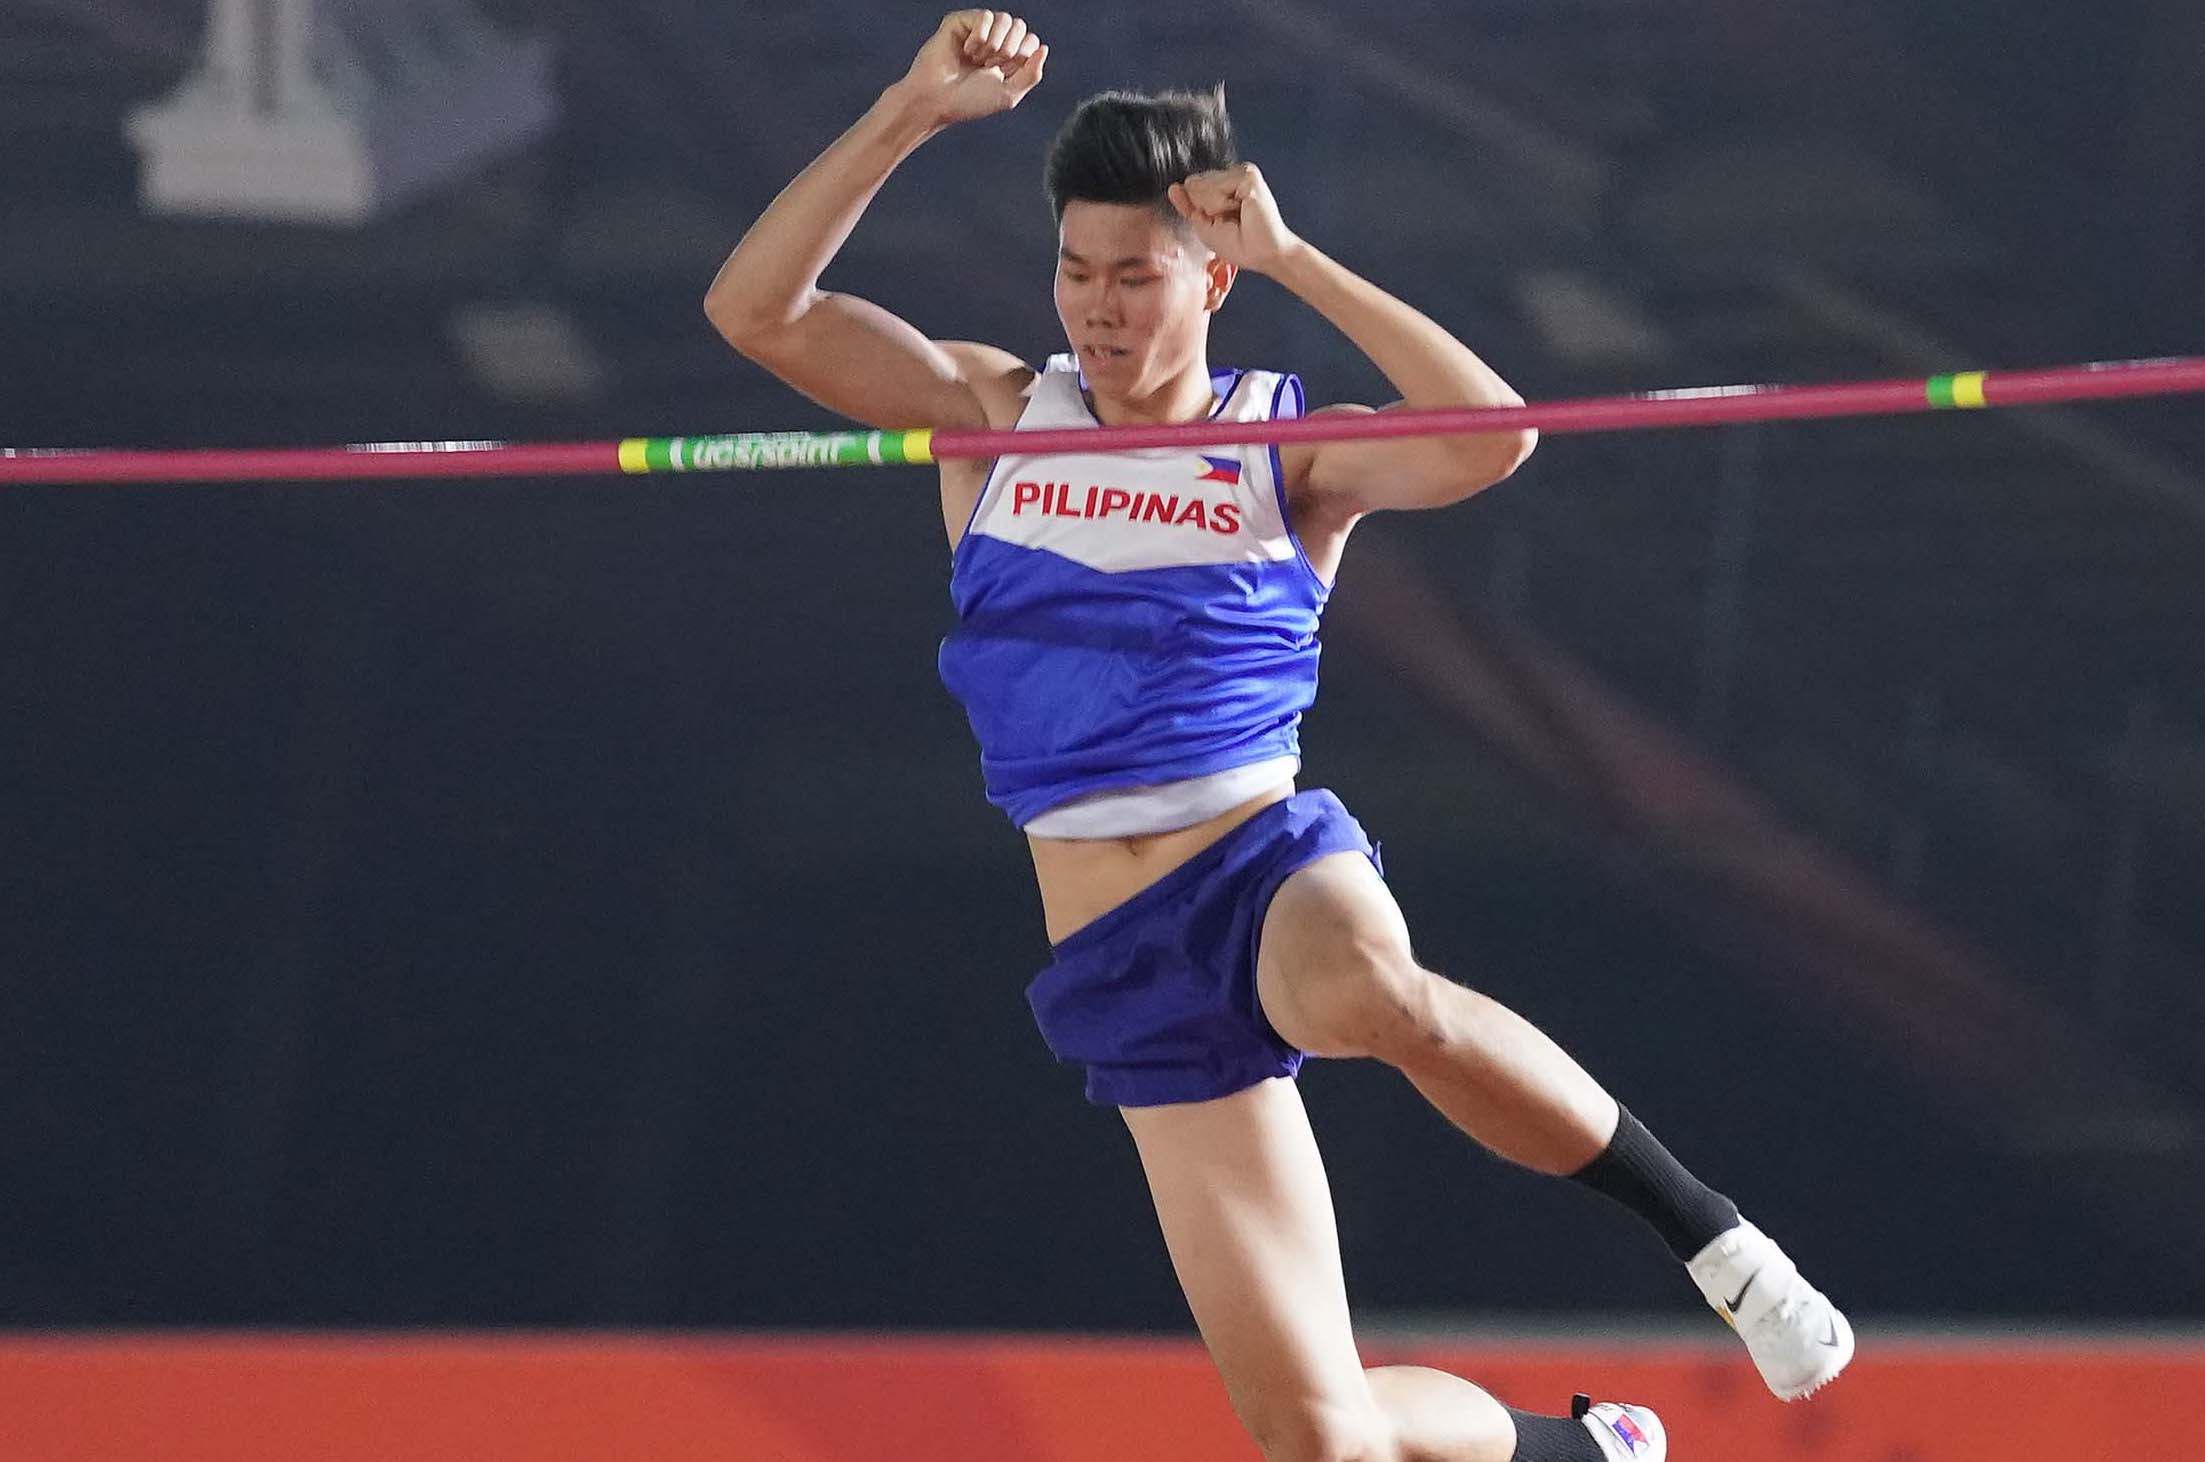 Pole Vaulter Ernest John Obiena wins Gold during the 30th Seagames at the New Clark City.